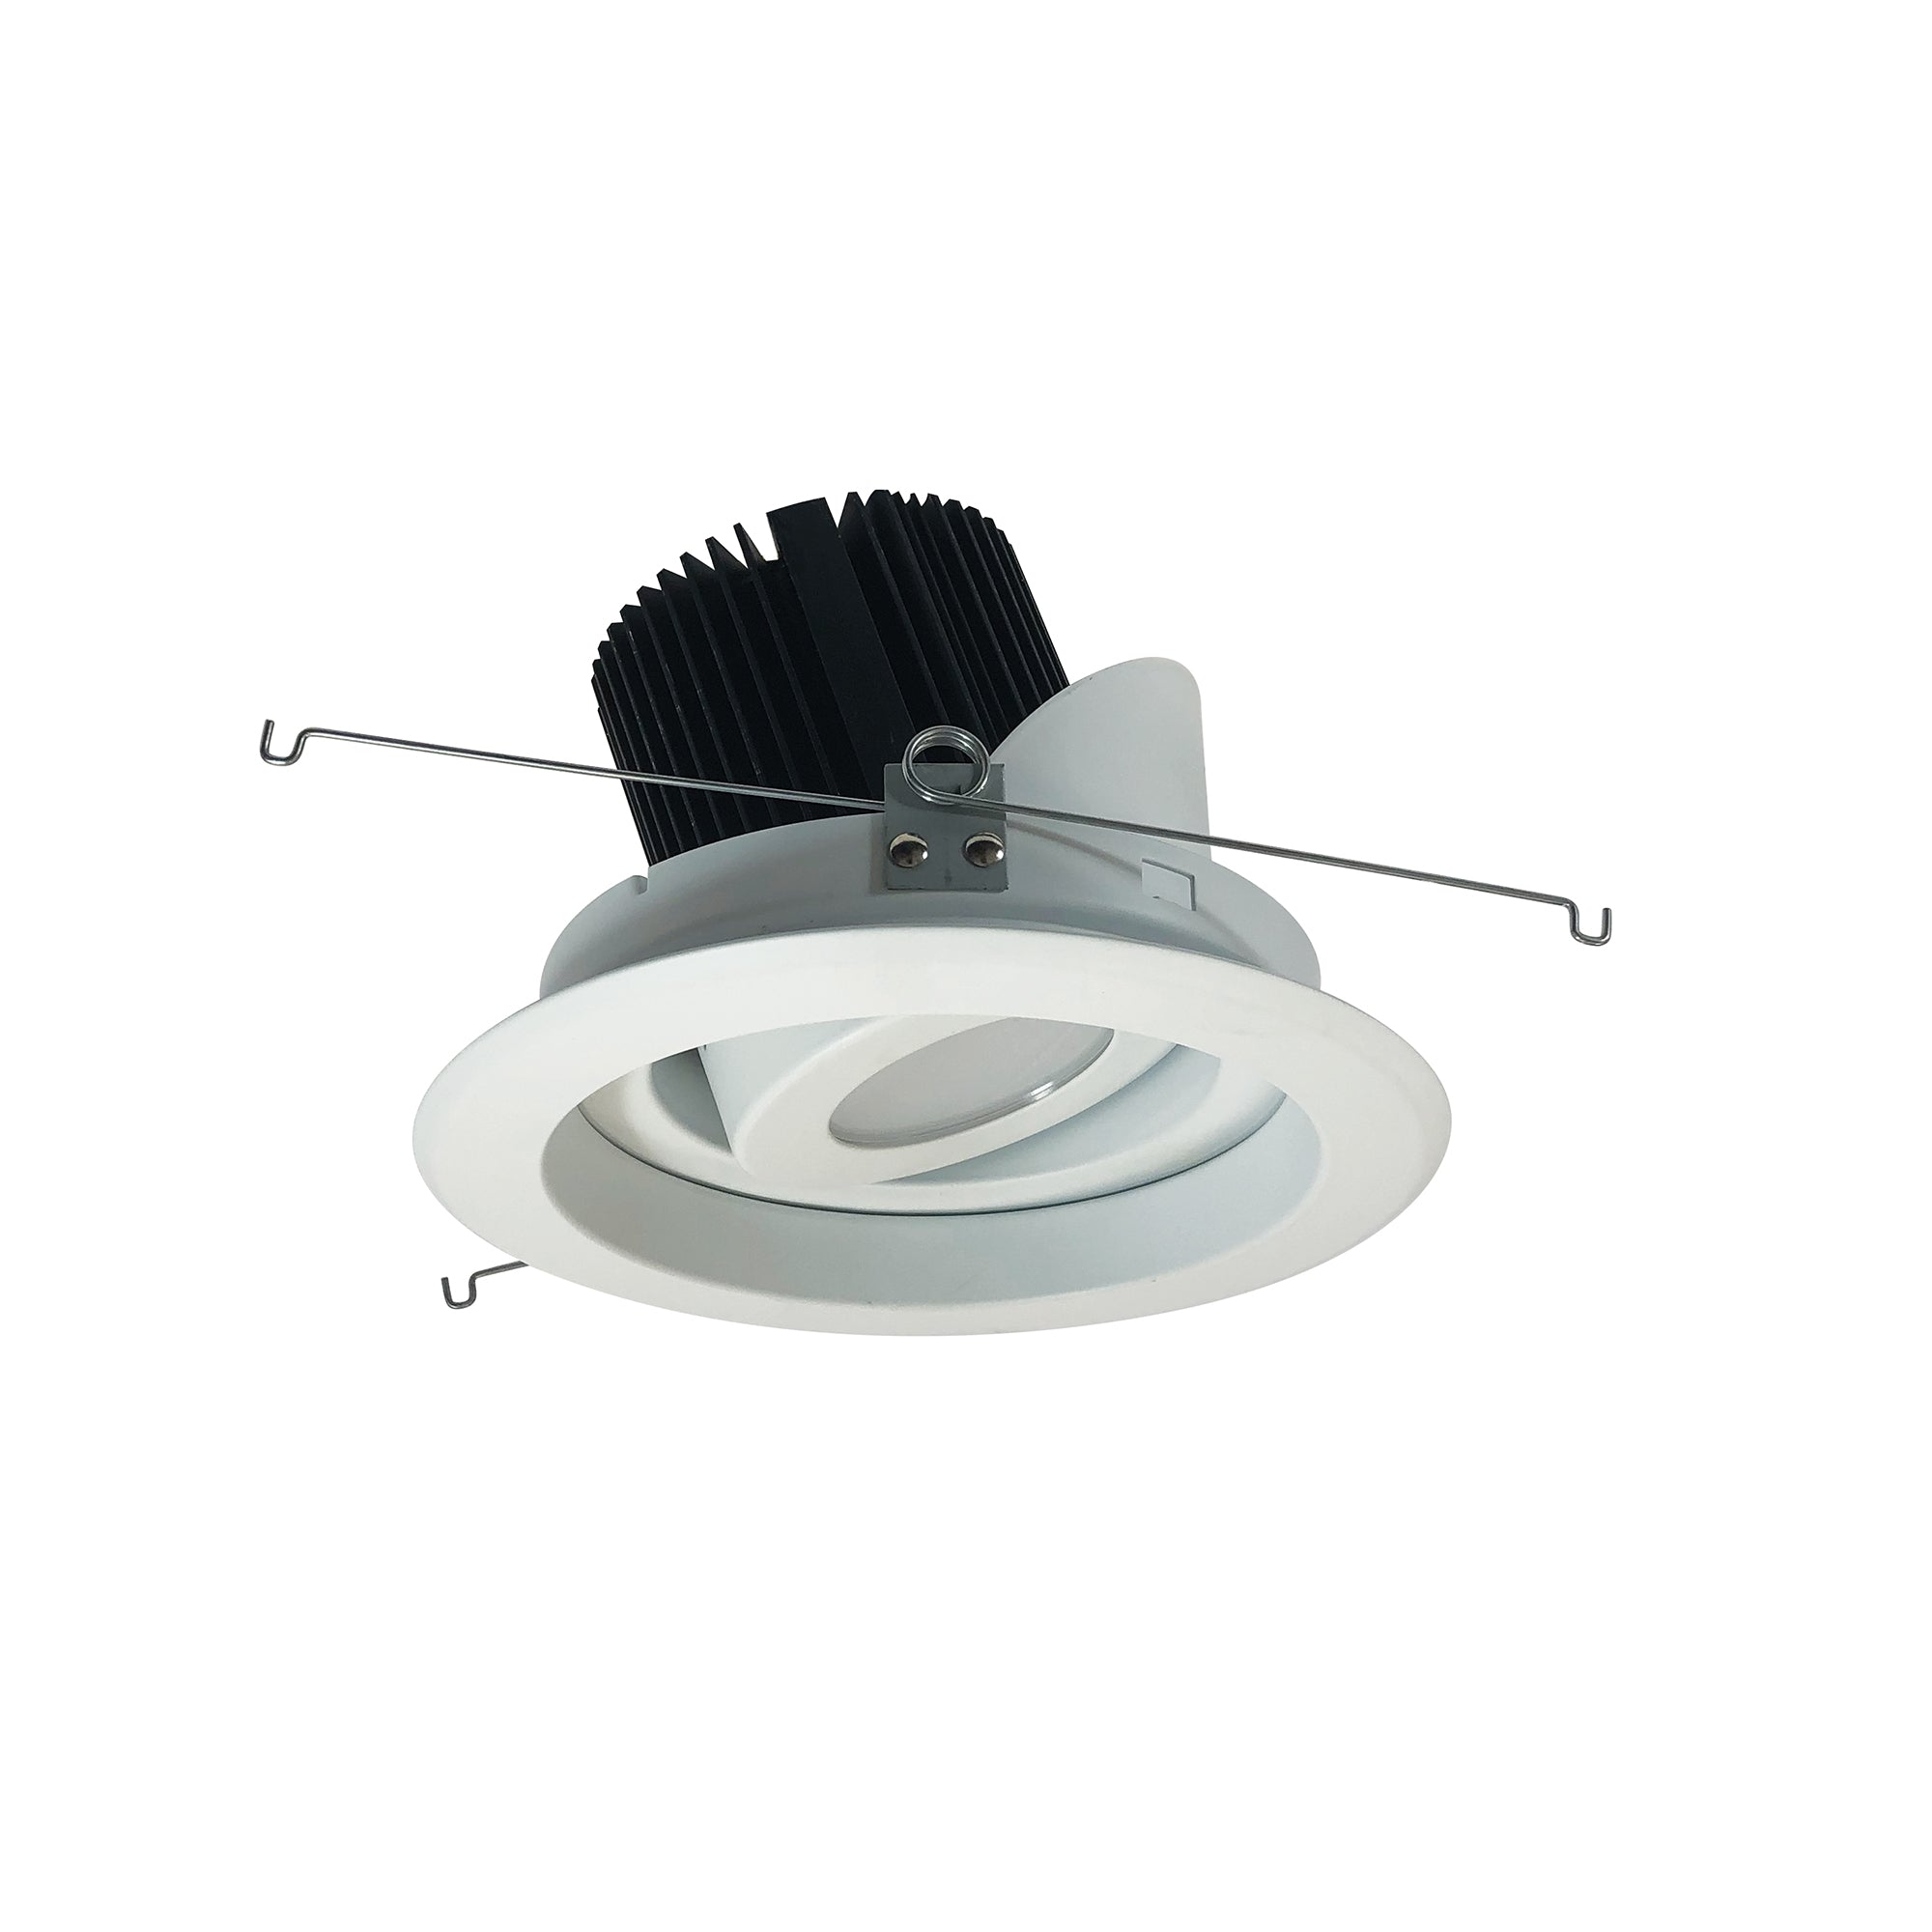 Nora Lighting NRM2-619L2530MMPW - Recessed - 6 Inch Marquise II Round Regressed Adj. Reflector, Medium Flood, 2500lm, 3000K, Matte Powder White (Not Compatible with NHRM2-625 Housings)